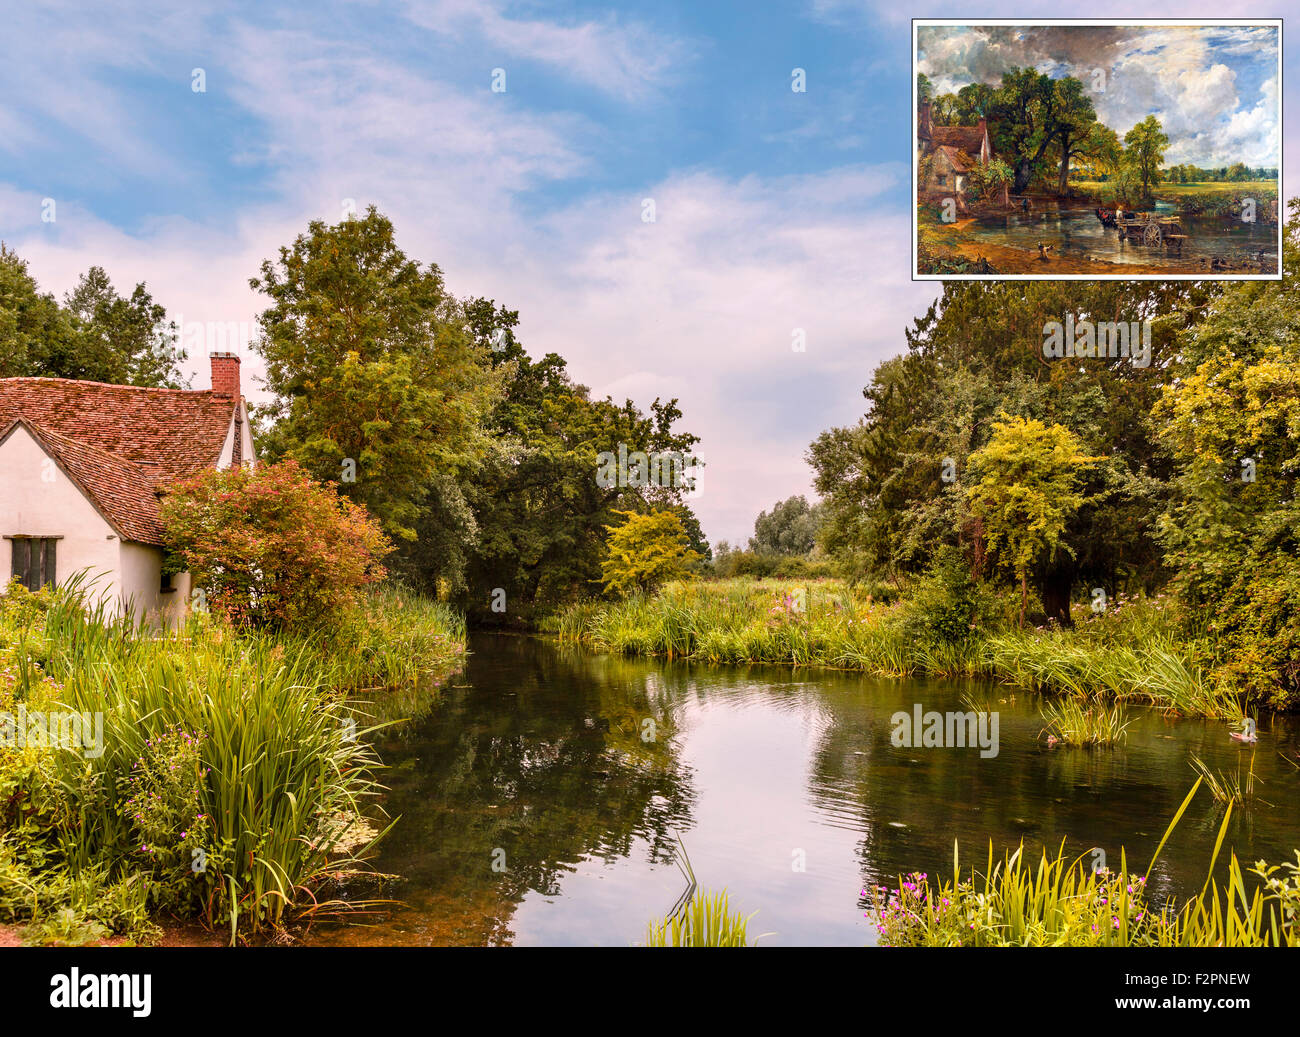 View featured in Constable’s painting The Hay Wain (inset), with Willy Lott’s Cottage on left, Flatford Mill, Essex, England, UK Stock Photo